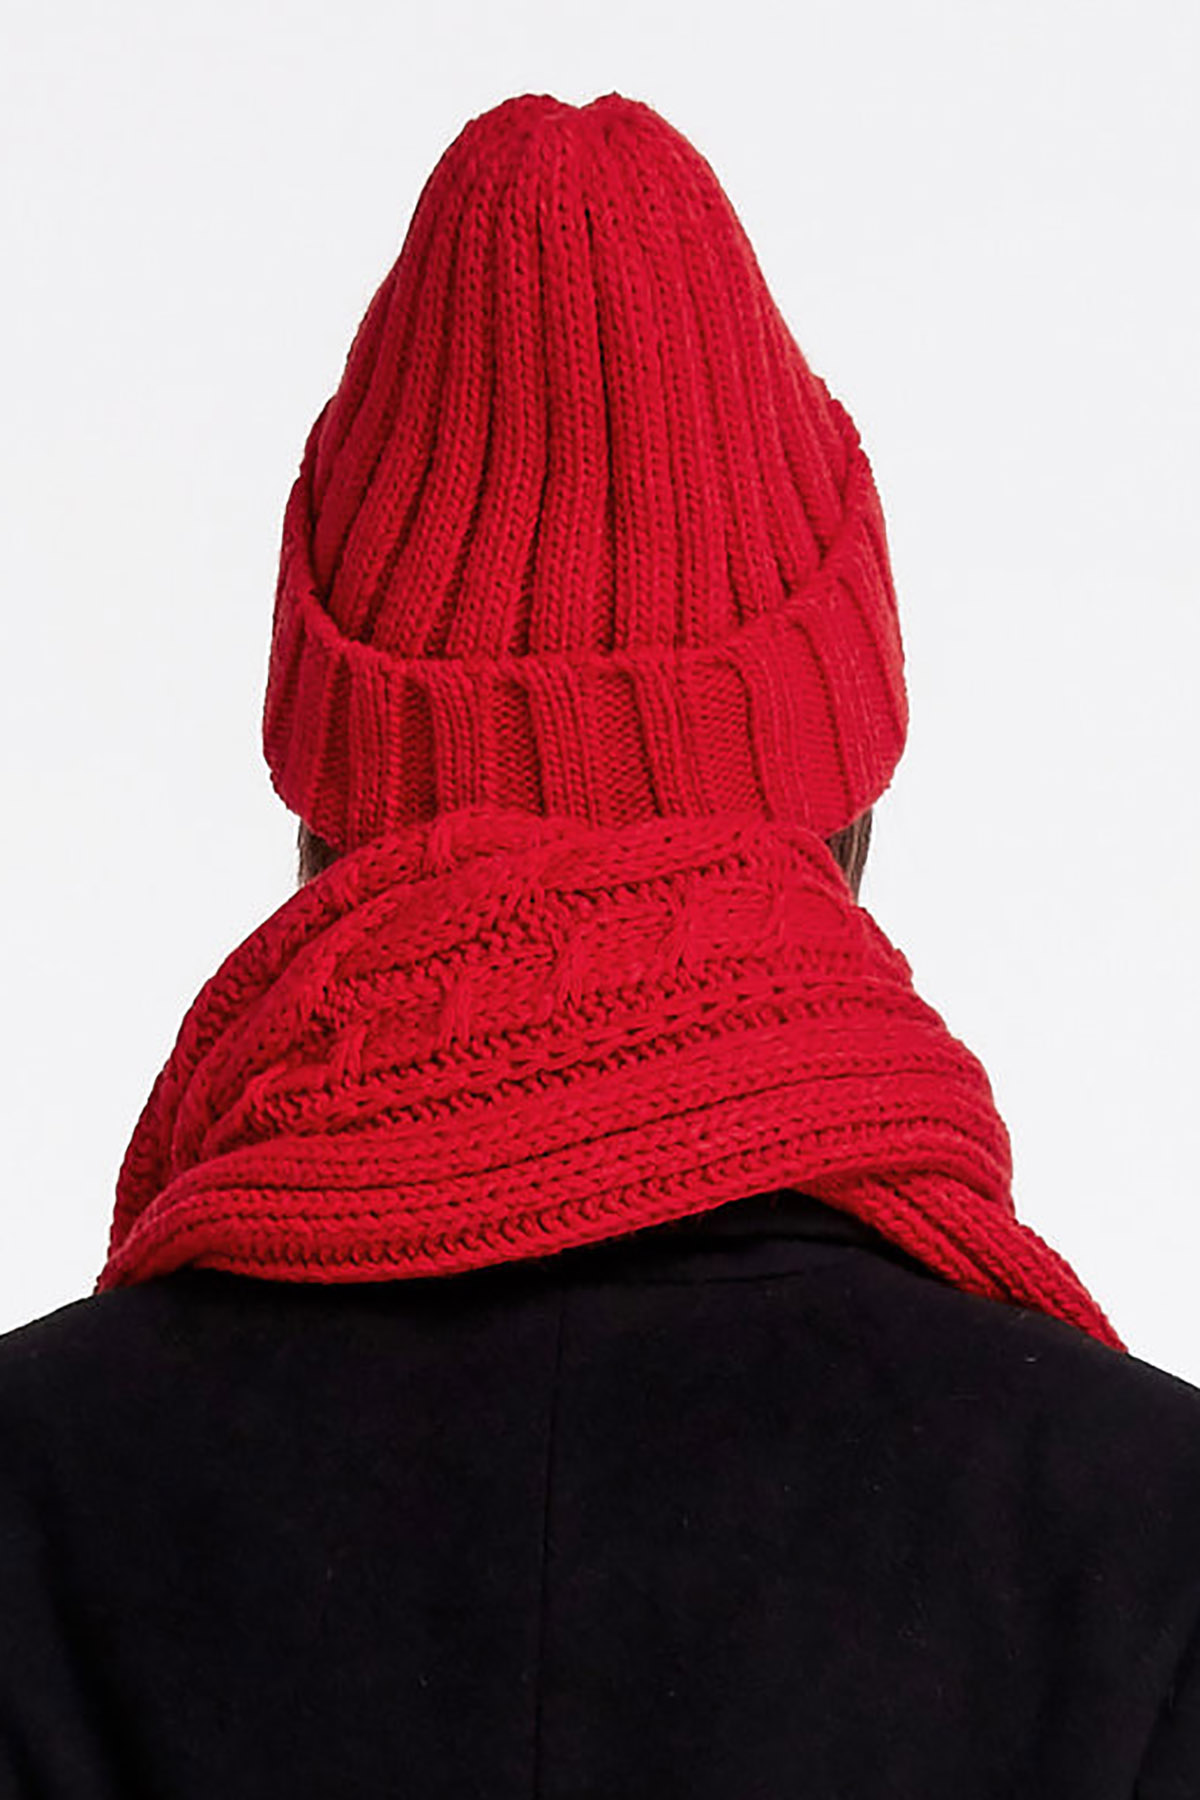 Red knit cap, photo 2